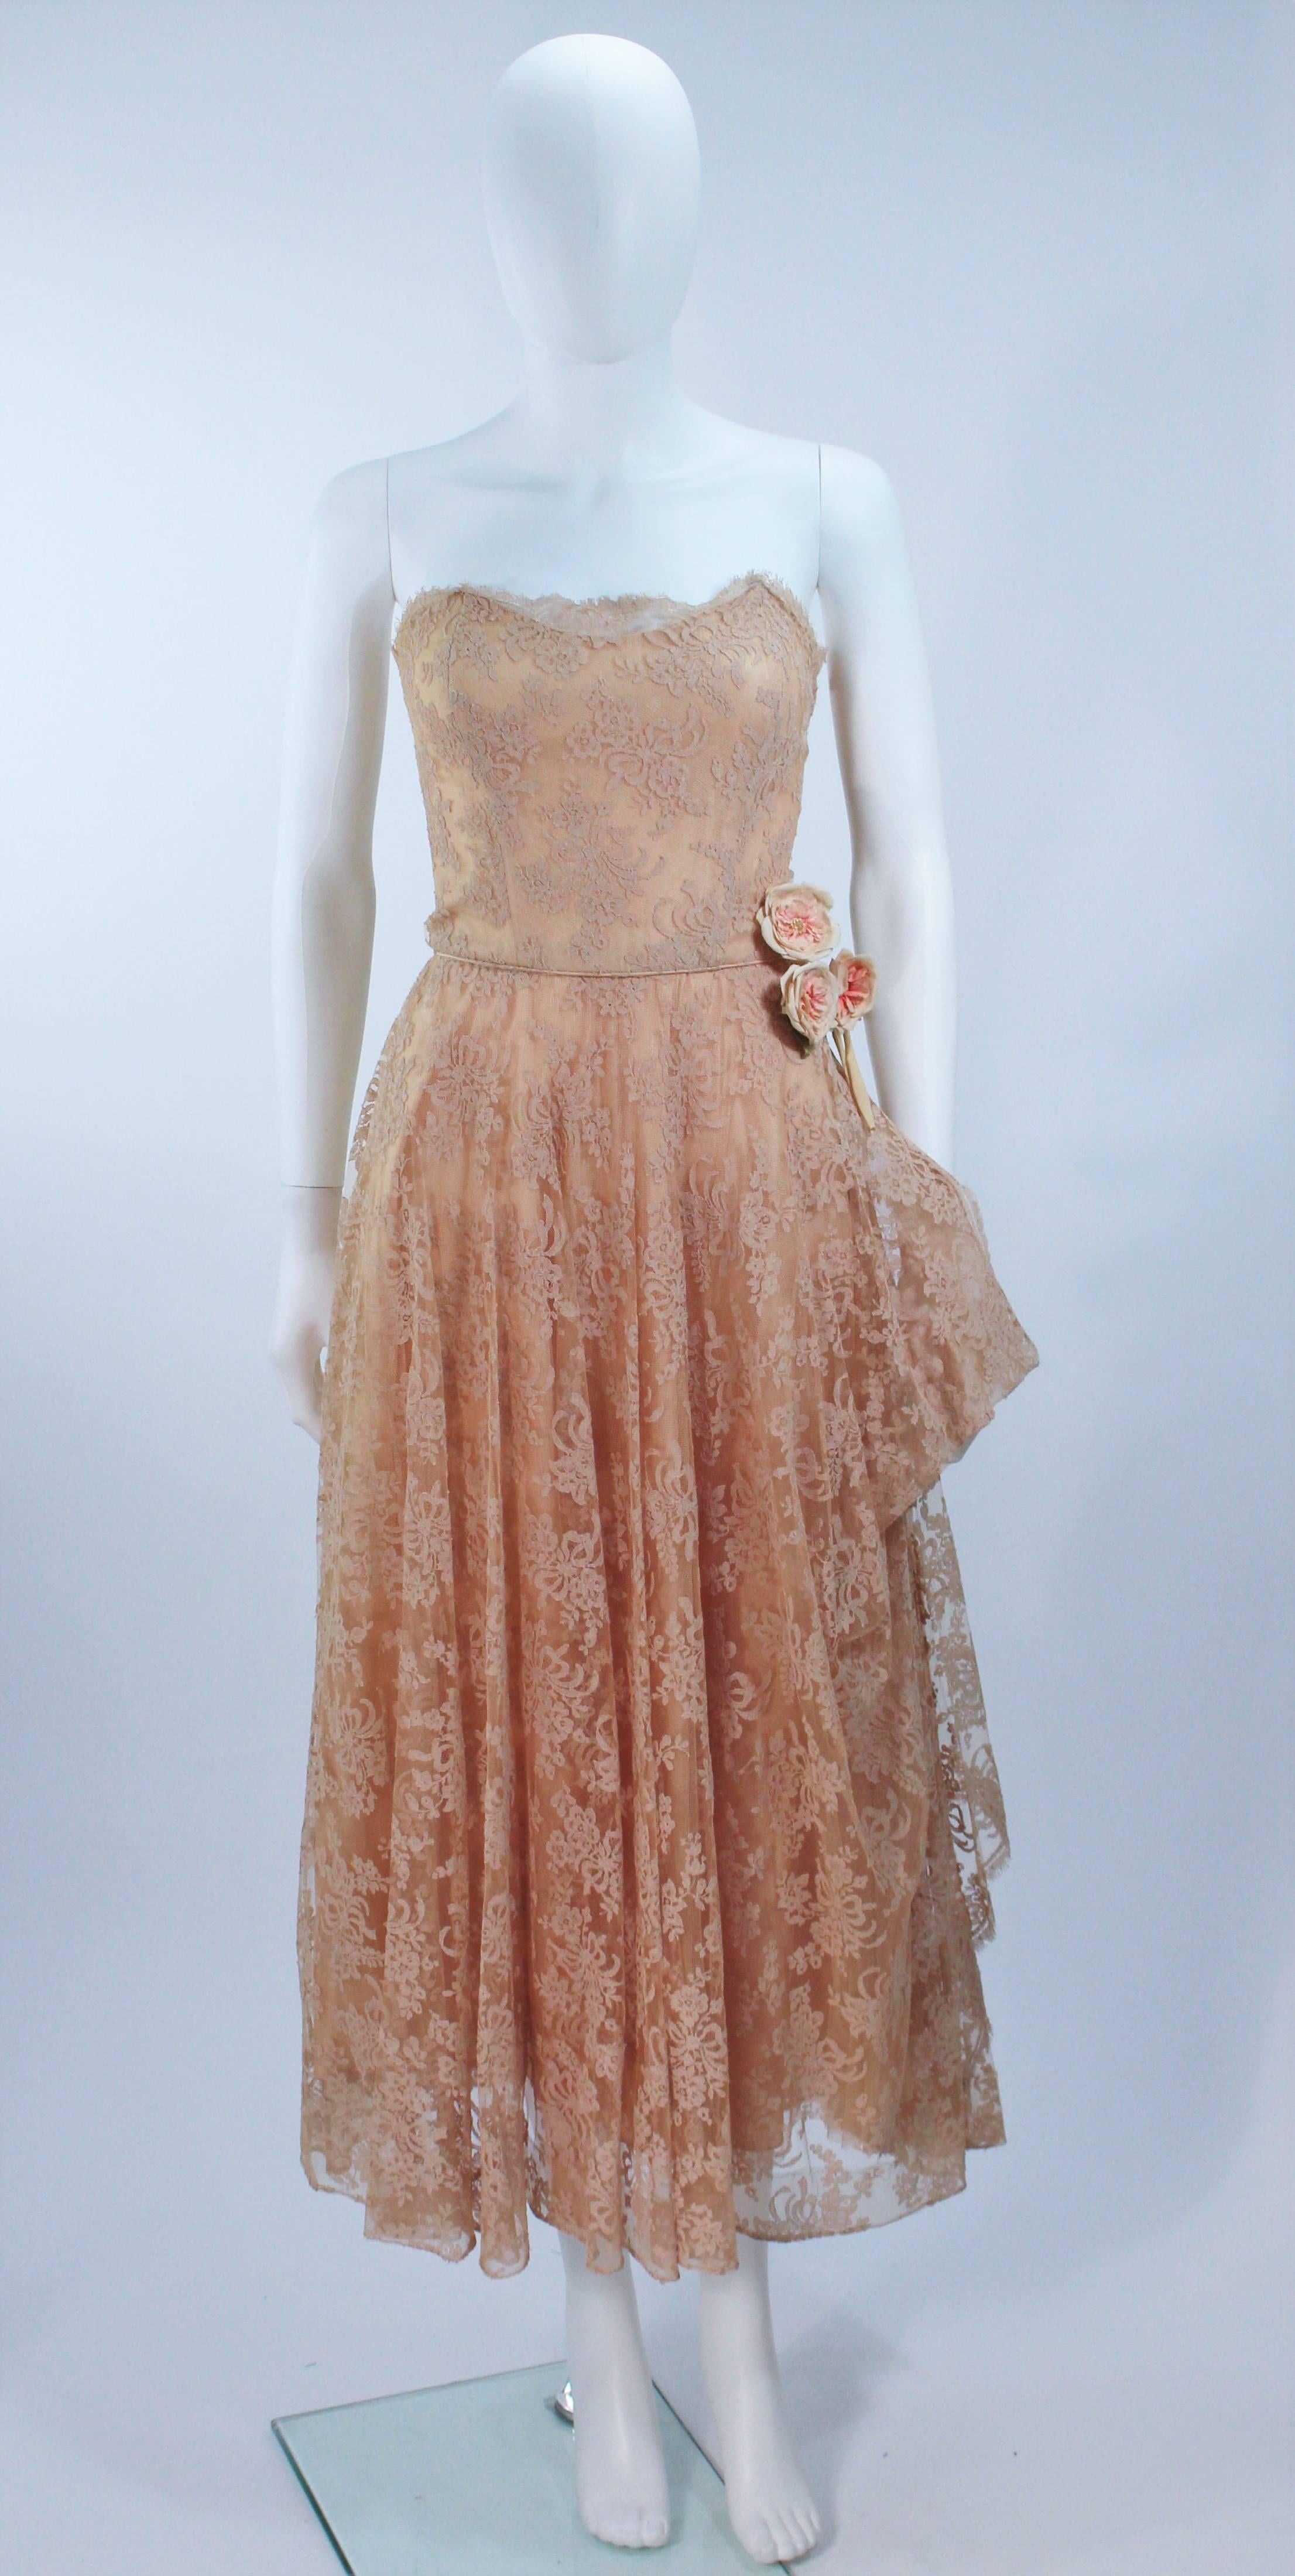  This Ceil Chapman  cocktail dress is composed of a nude lace. Features a draped strapless style with side floral applique. There is a center back zipper closure. In excellent vintage condition. 

  **Please cross-reference measurements for